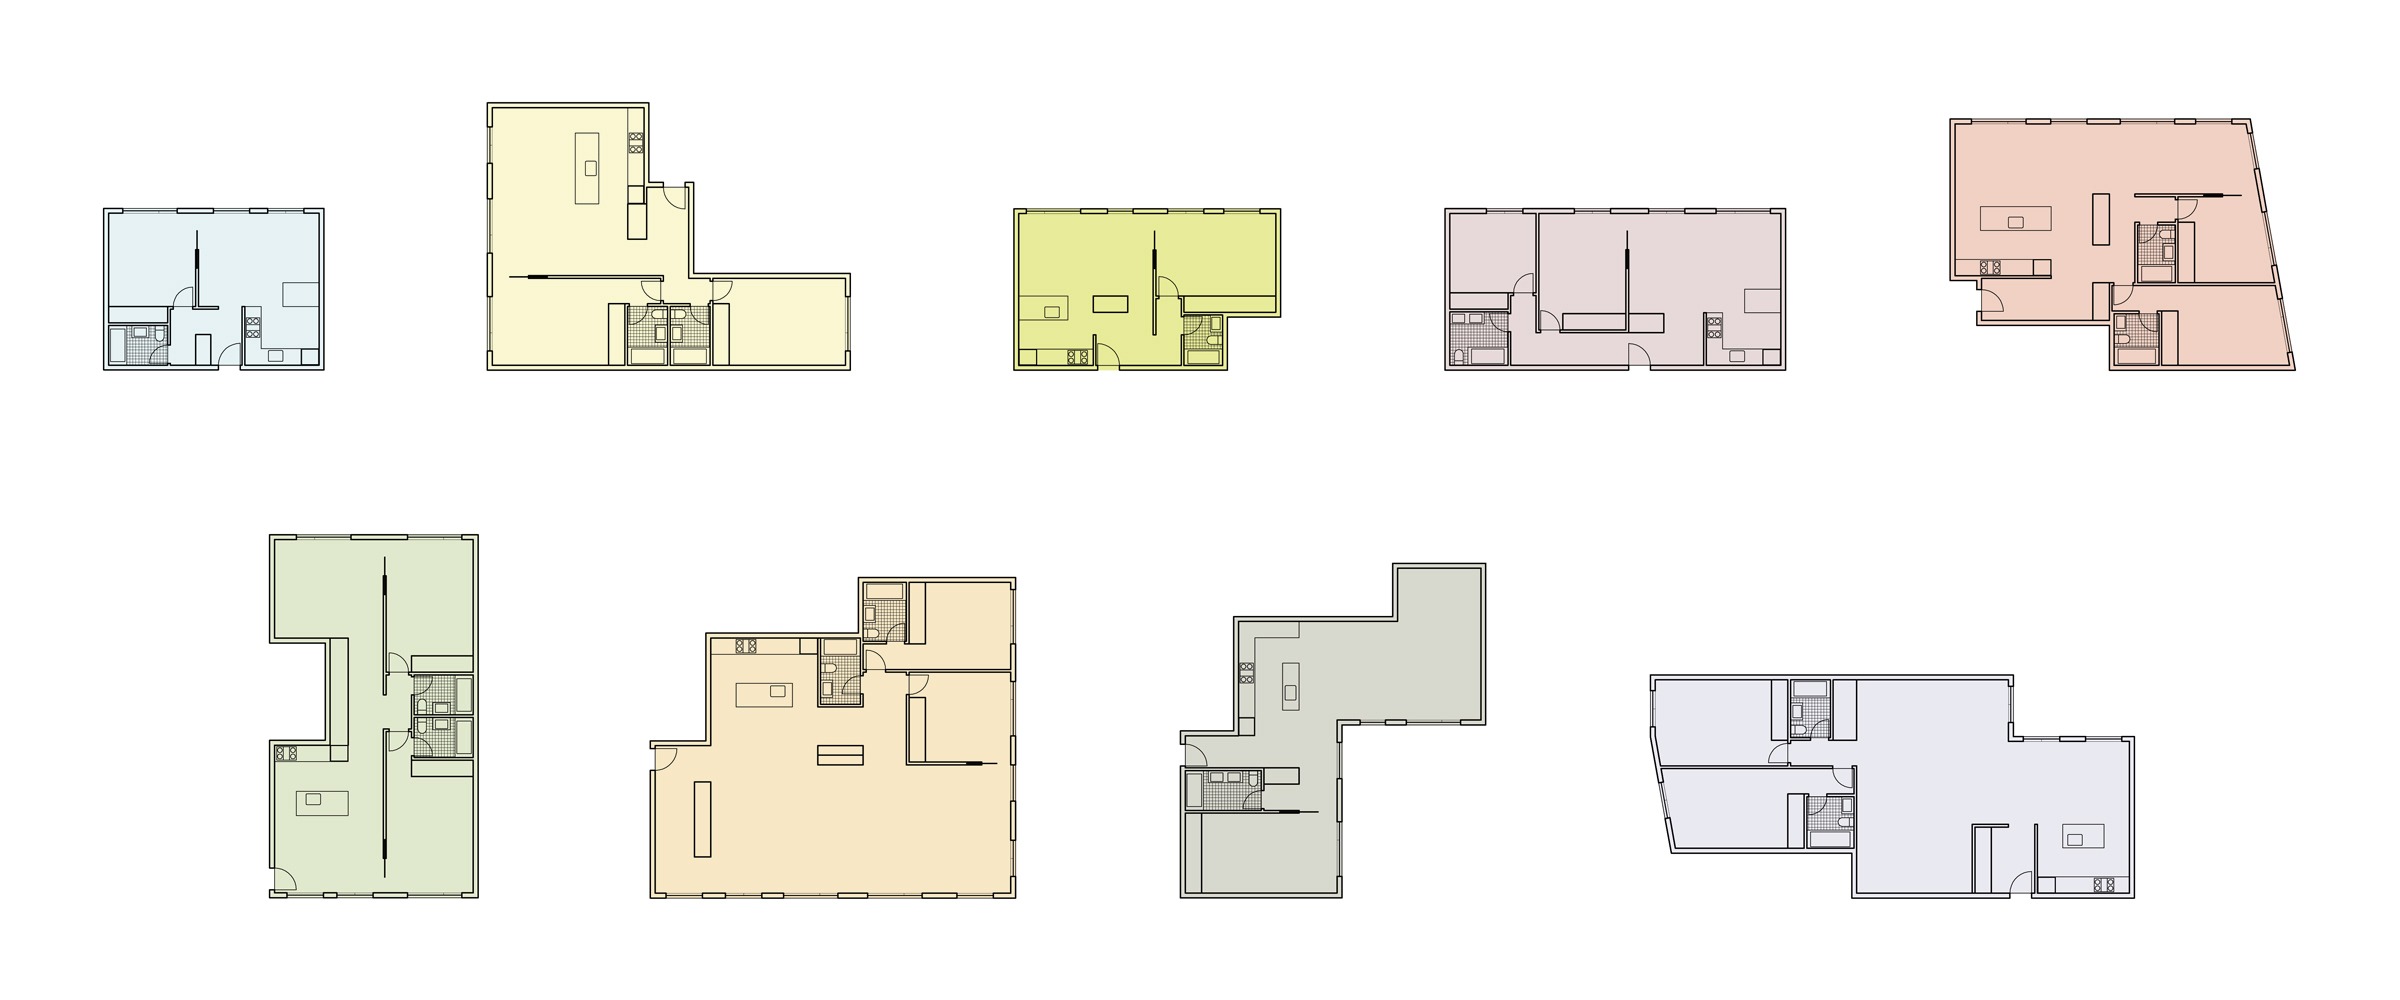 Housing Block. Enlarged floor plans of the units